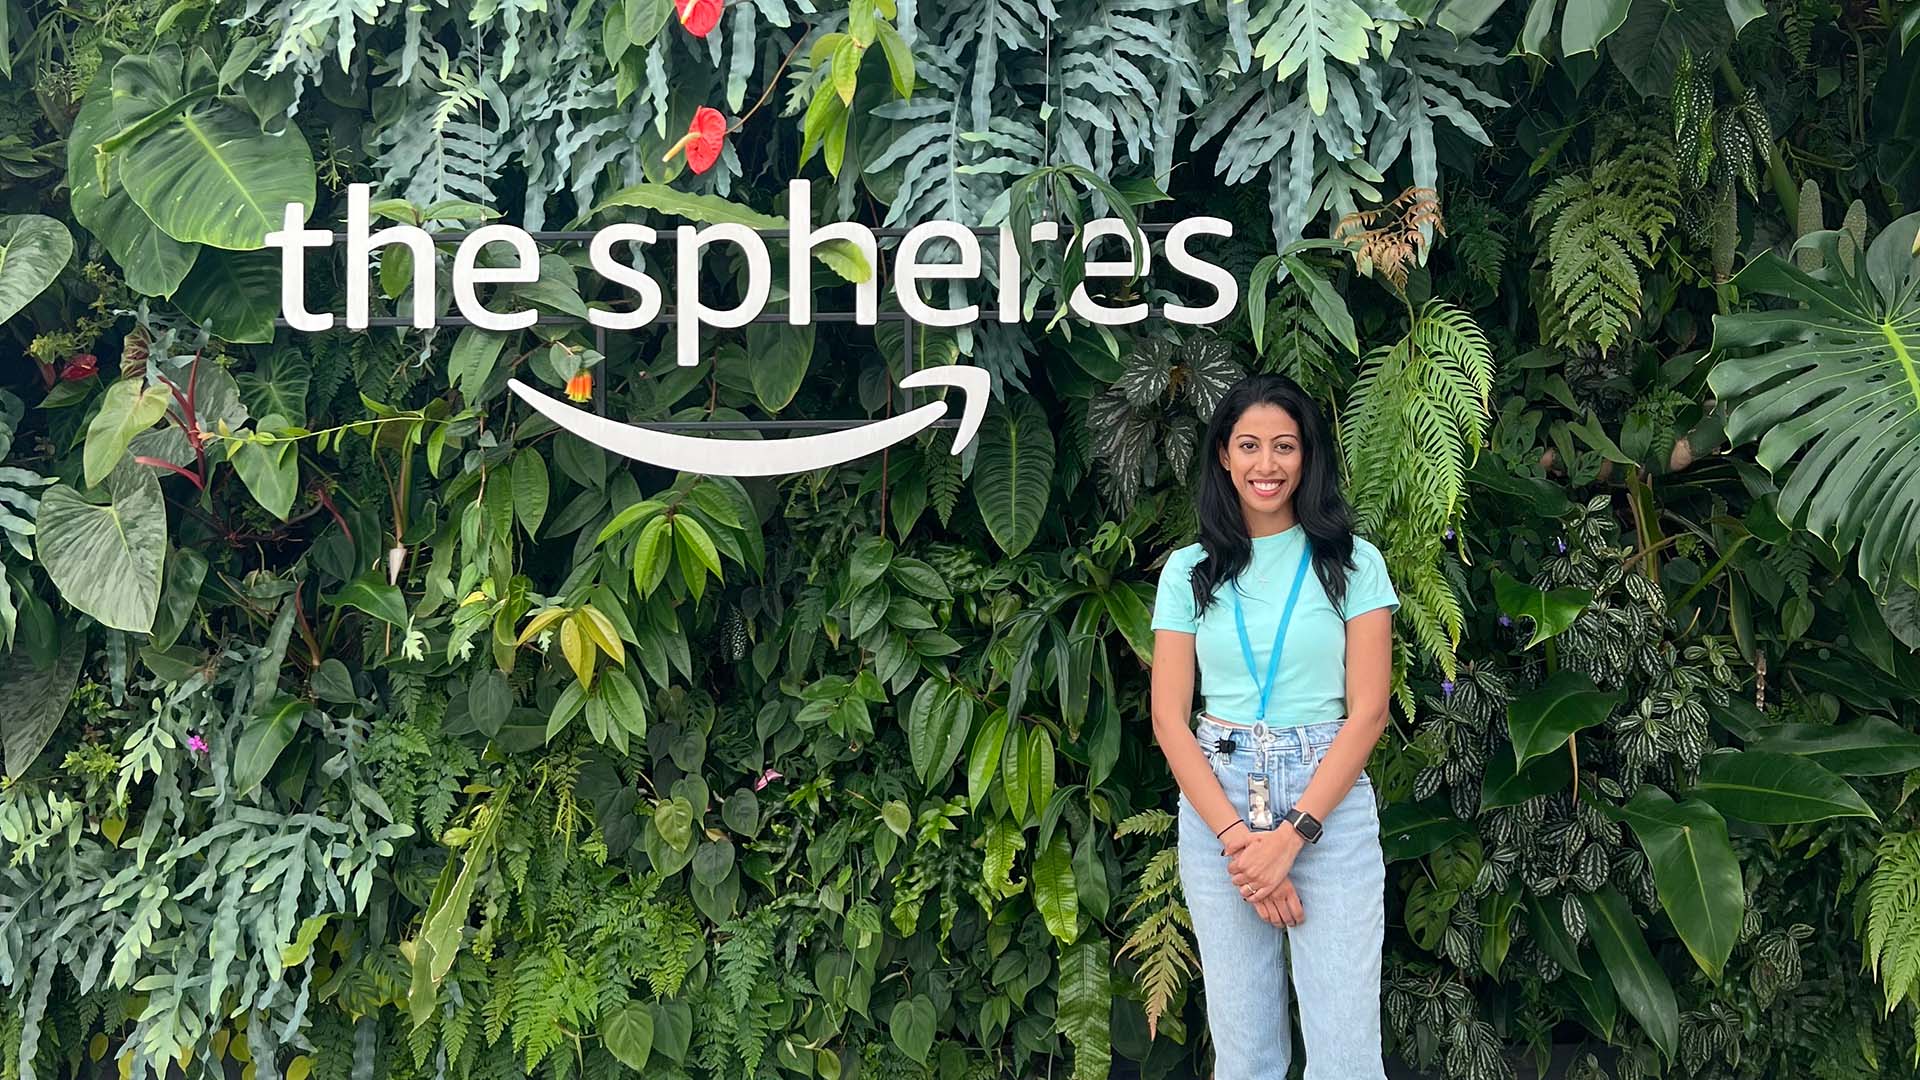 Internship at Amazon in 'something different' yields new skills and experience